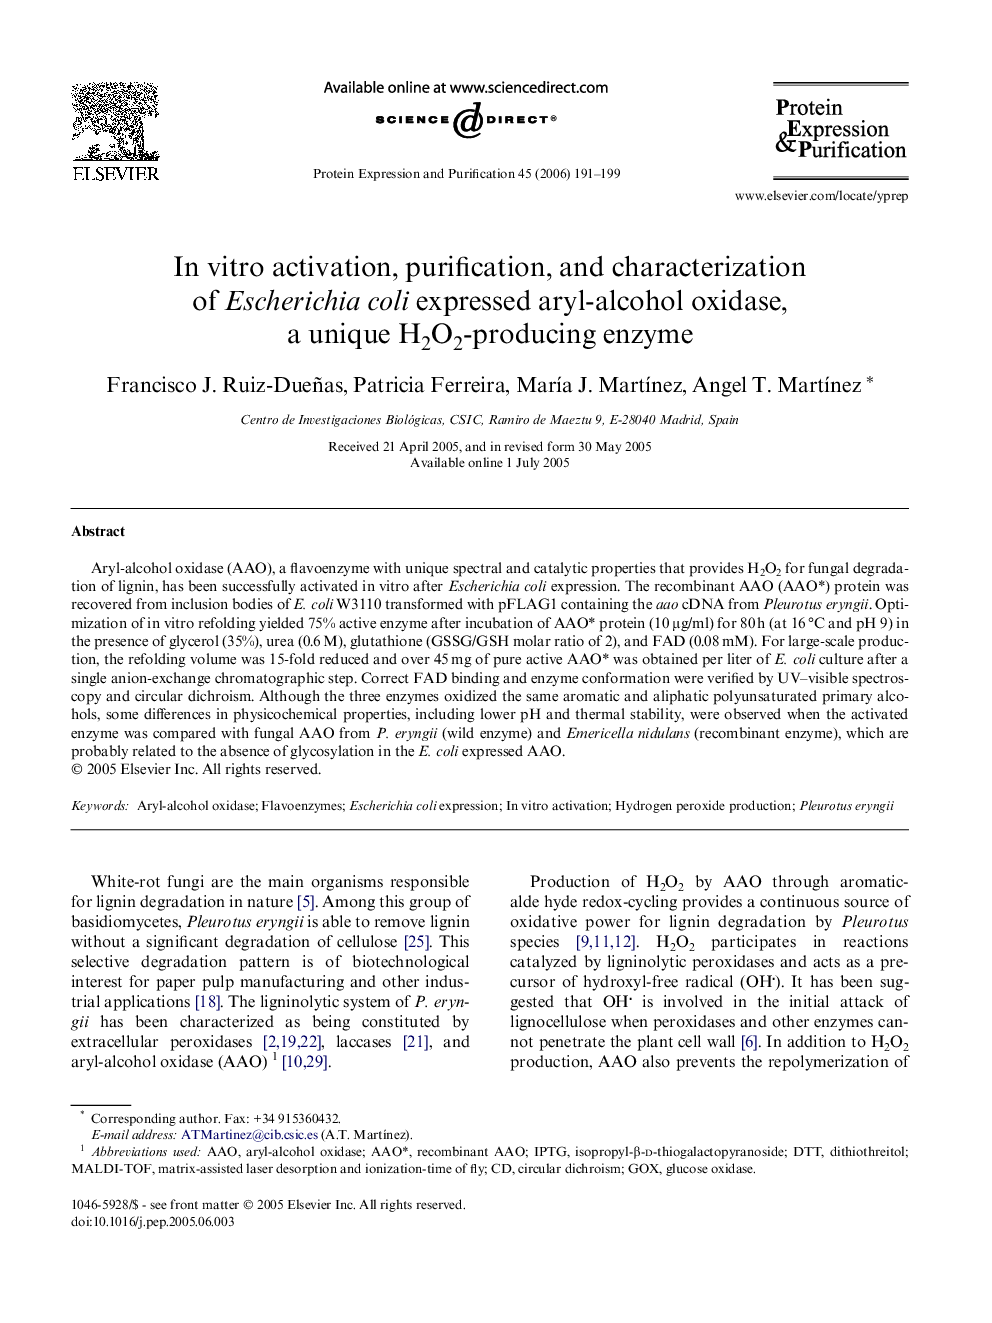 In vitro activation, purification, and characterization of Escherichia coli expressed aryl-alcohol oxidase, a unique H2O2-producing enzyme